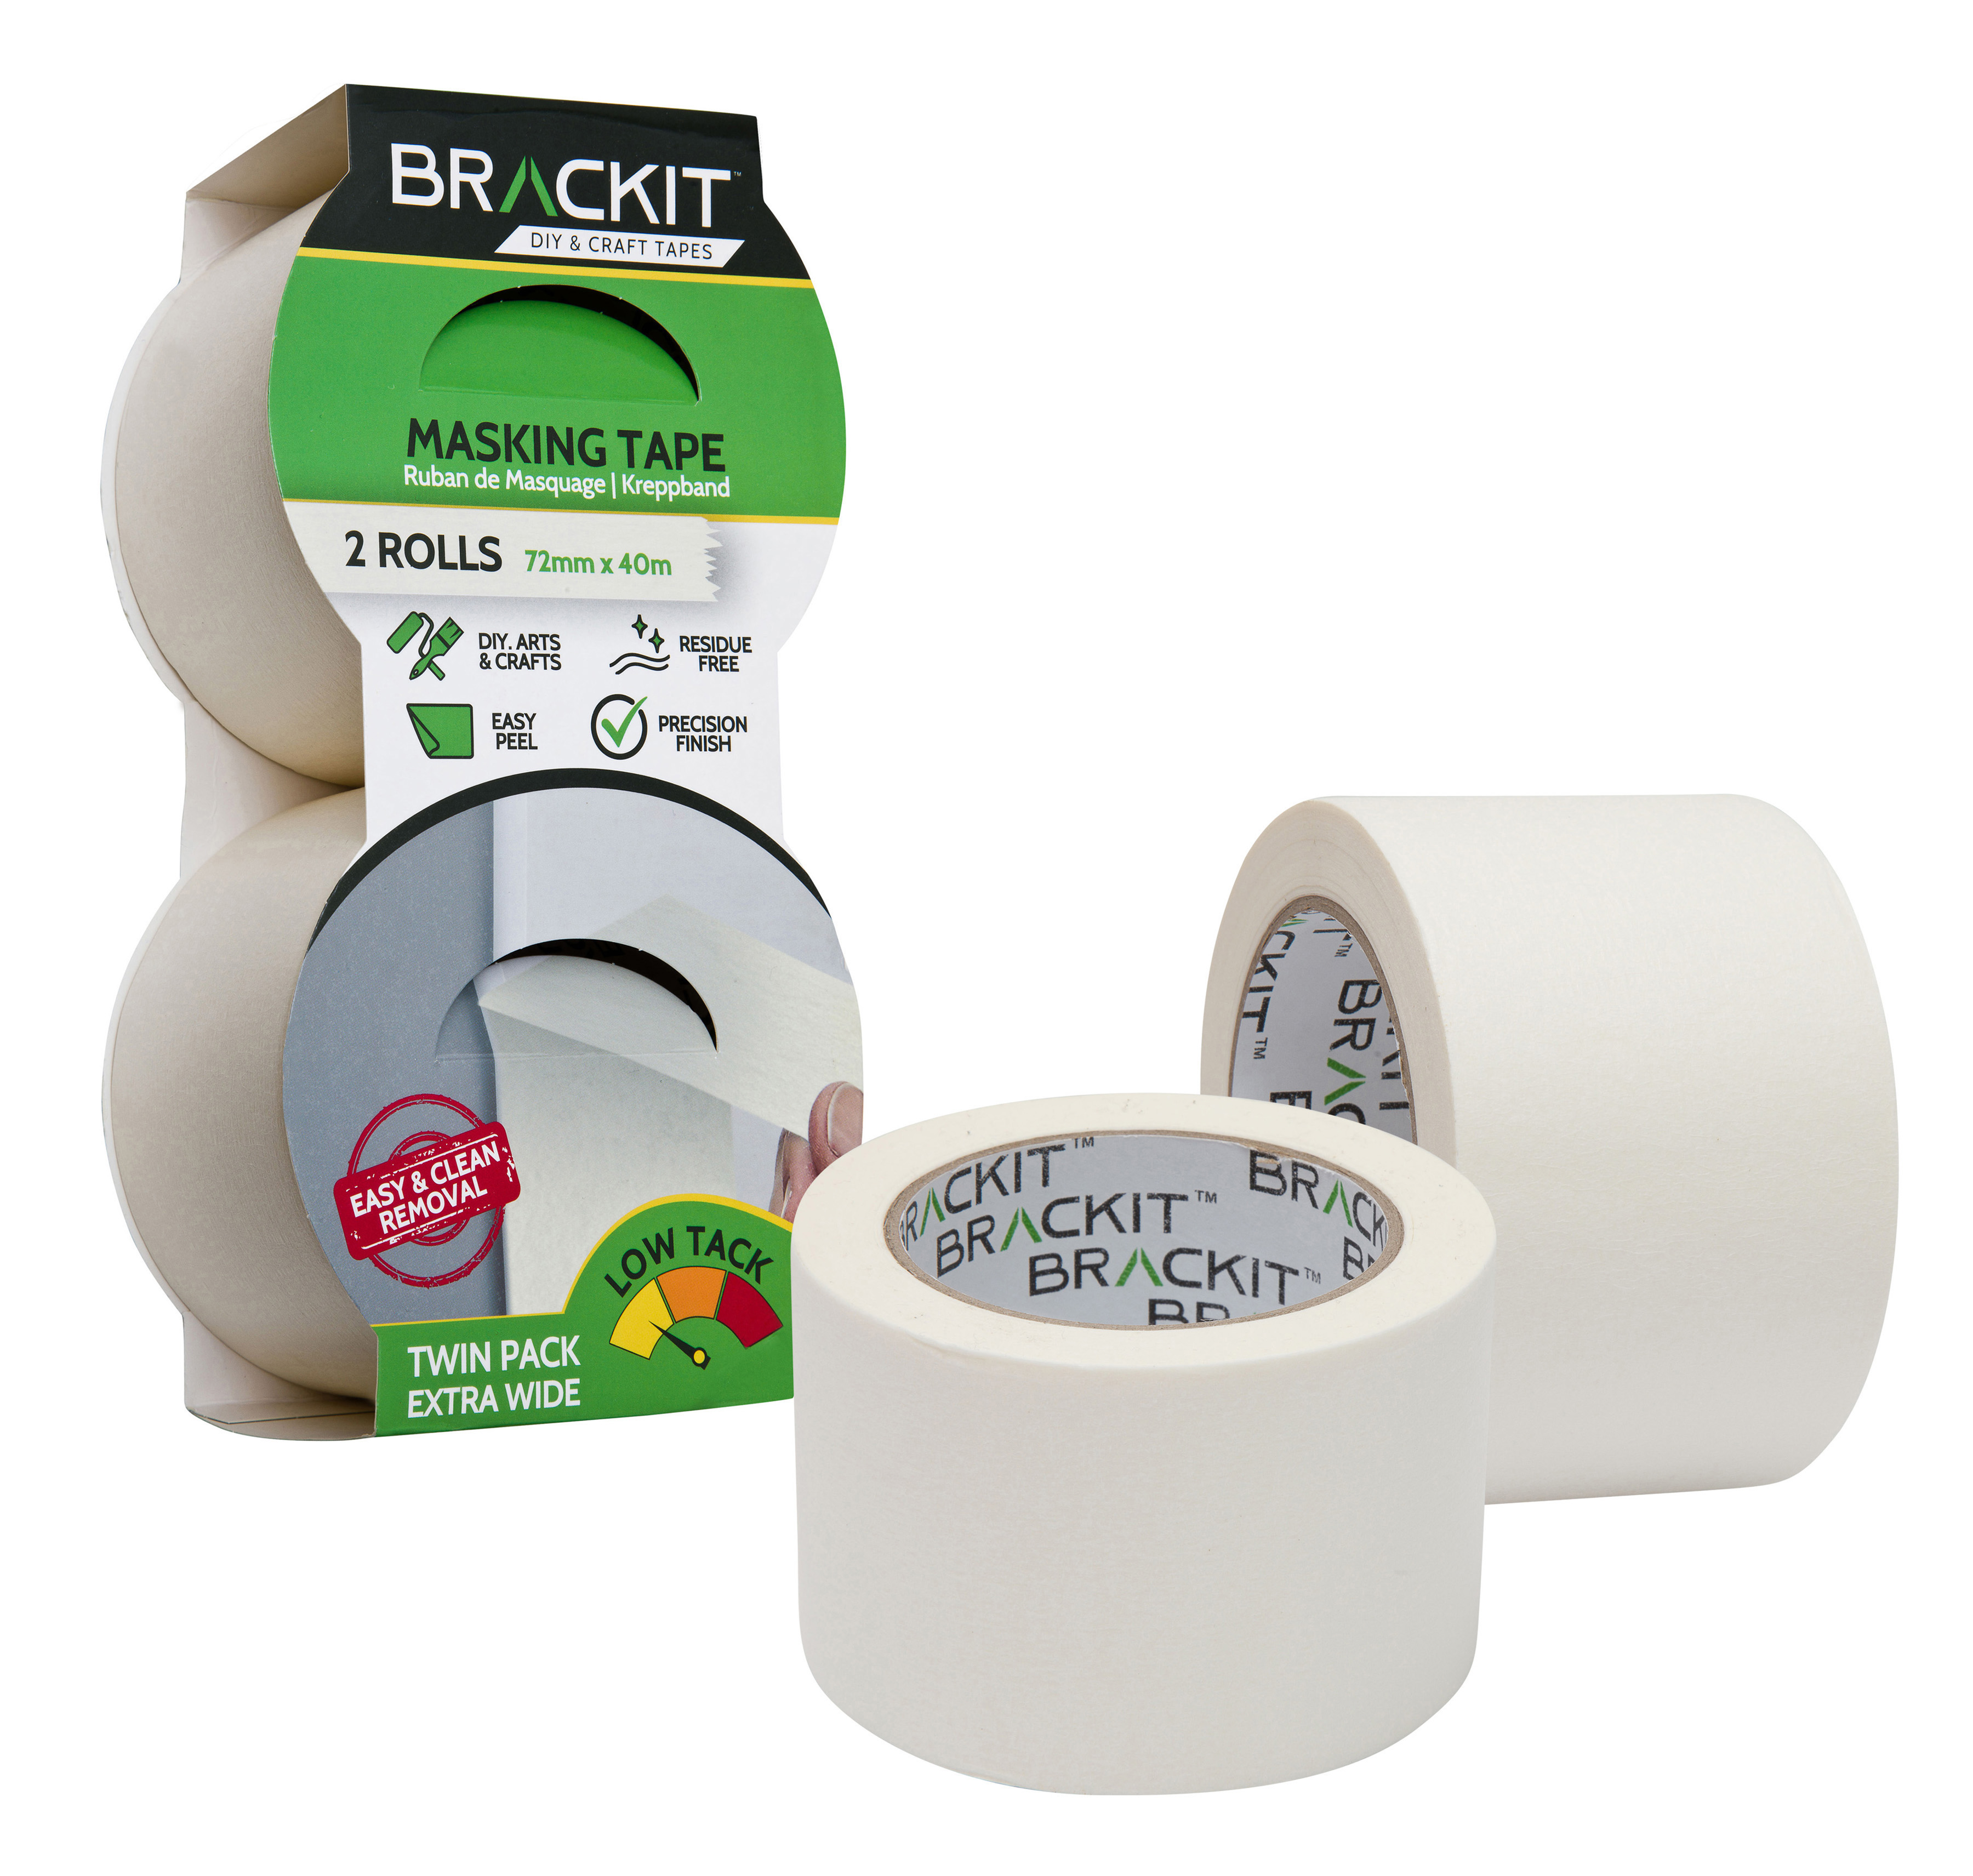 32 rolls (16 * 2 packs) brackit White Masking Tape; Twin Pack - Easy Removal For Painting and Decorating or Arts and Crafts… (72mm)